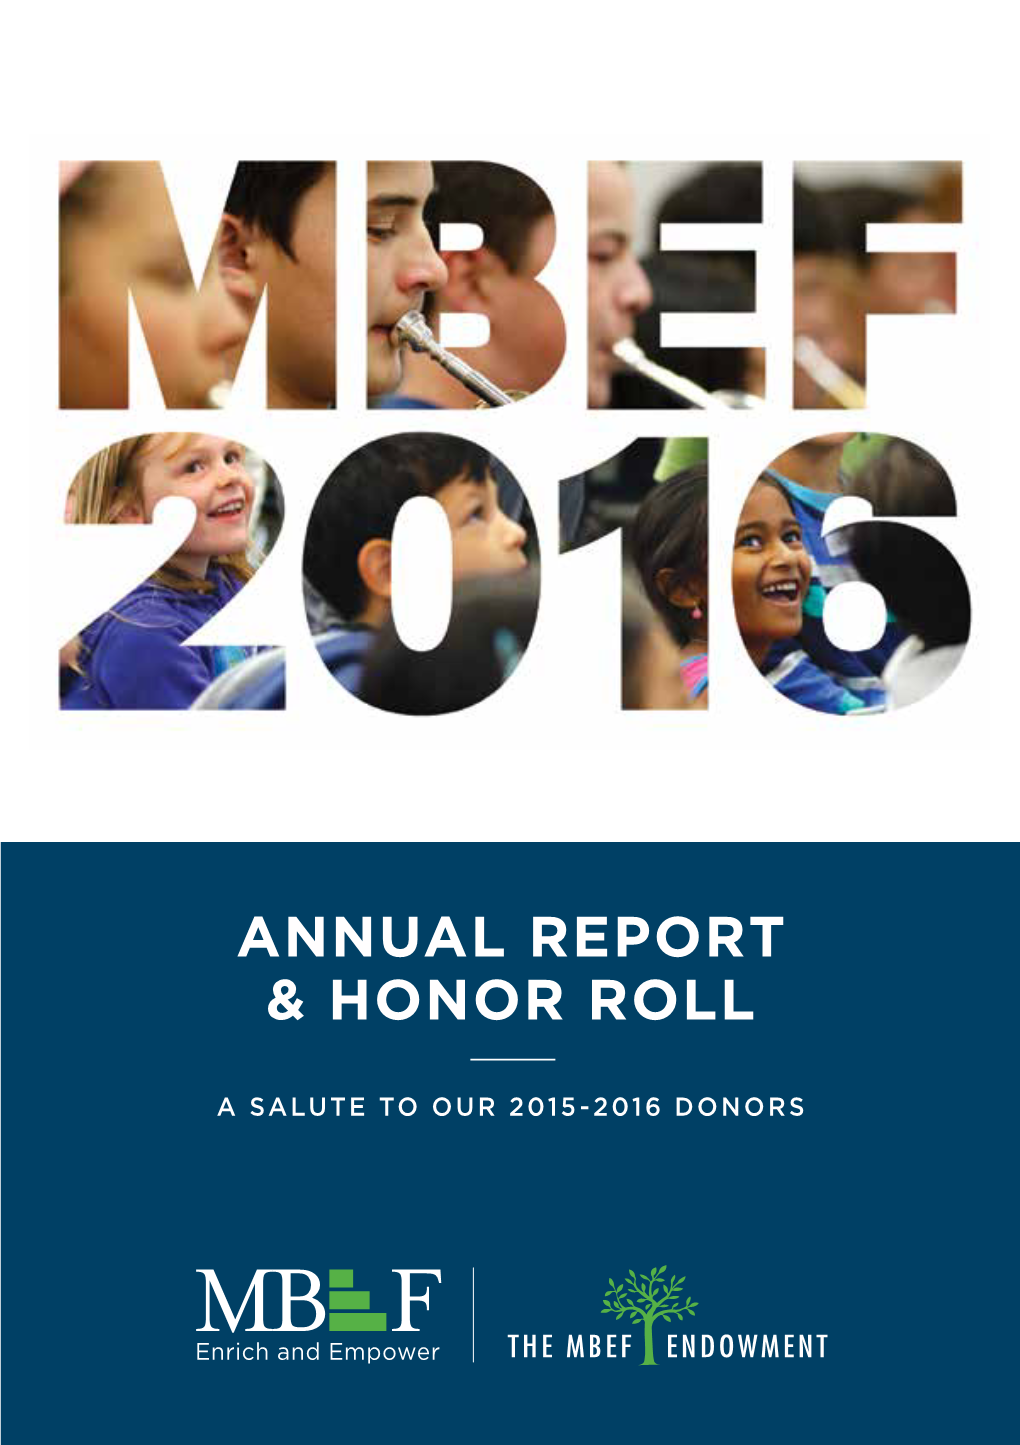 Annual Report & Honor Roll